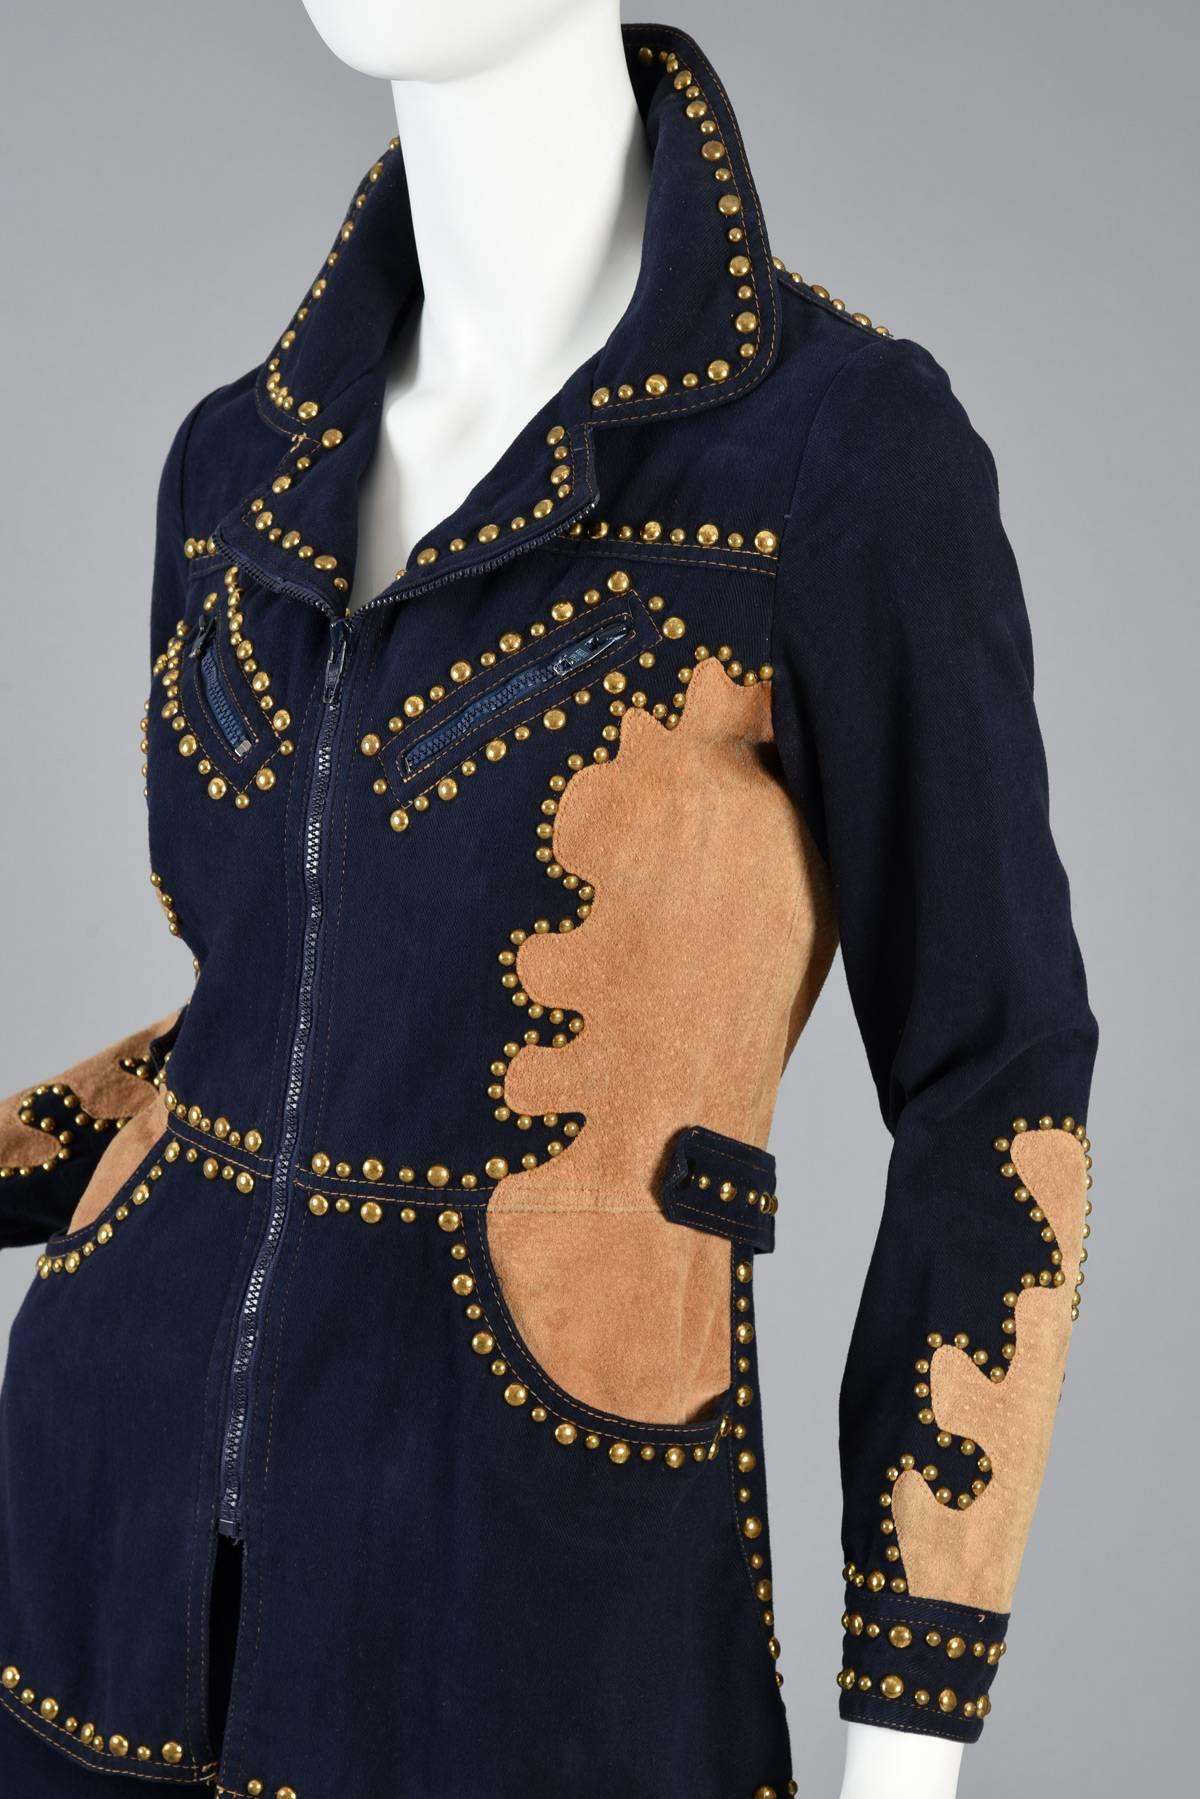 1970s Roncelli Studded Leather + Denim Suit For Sale 2